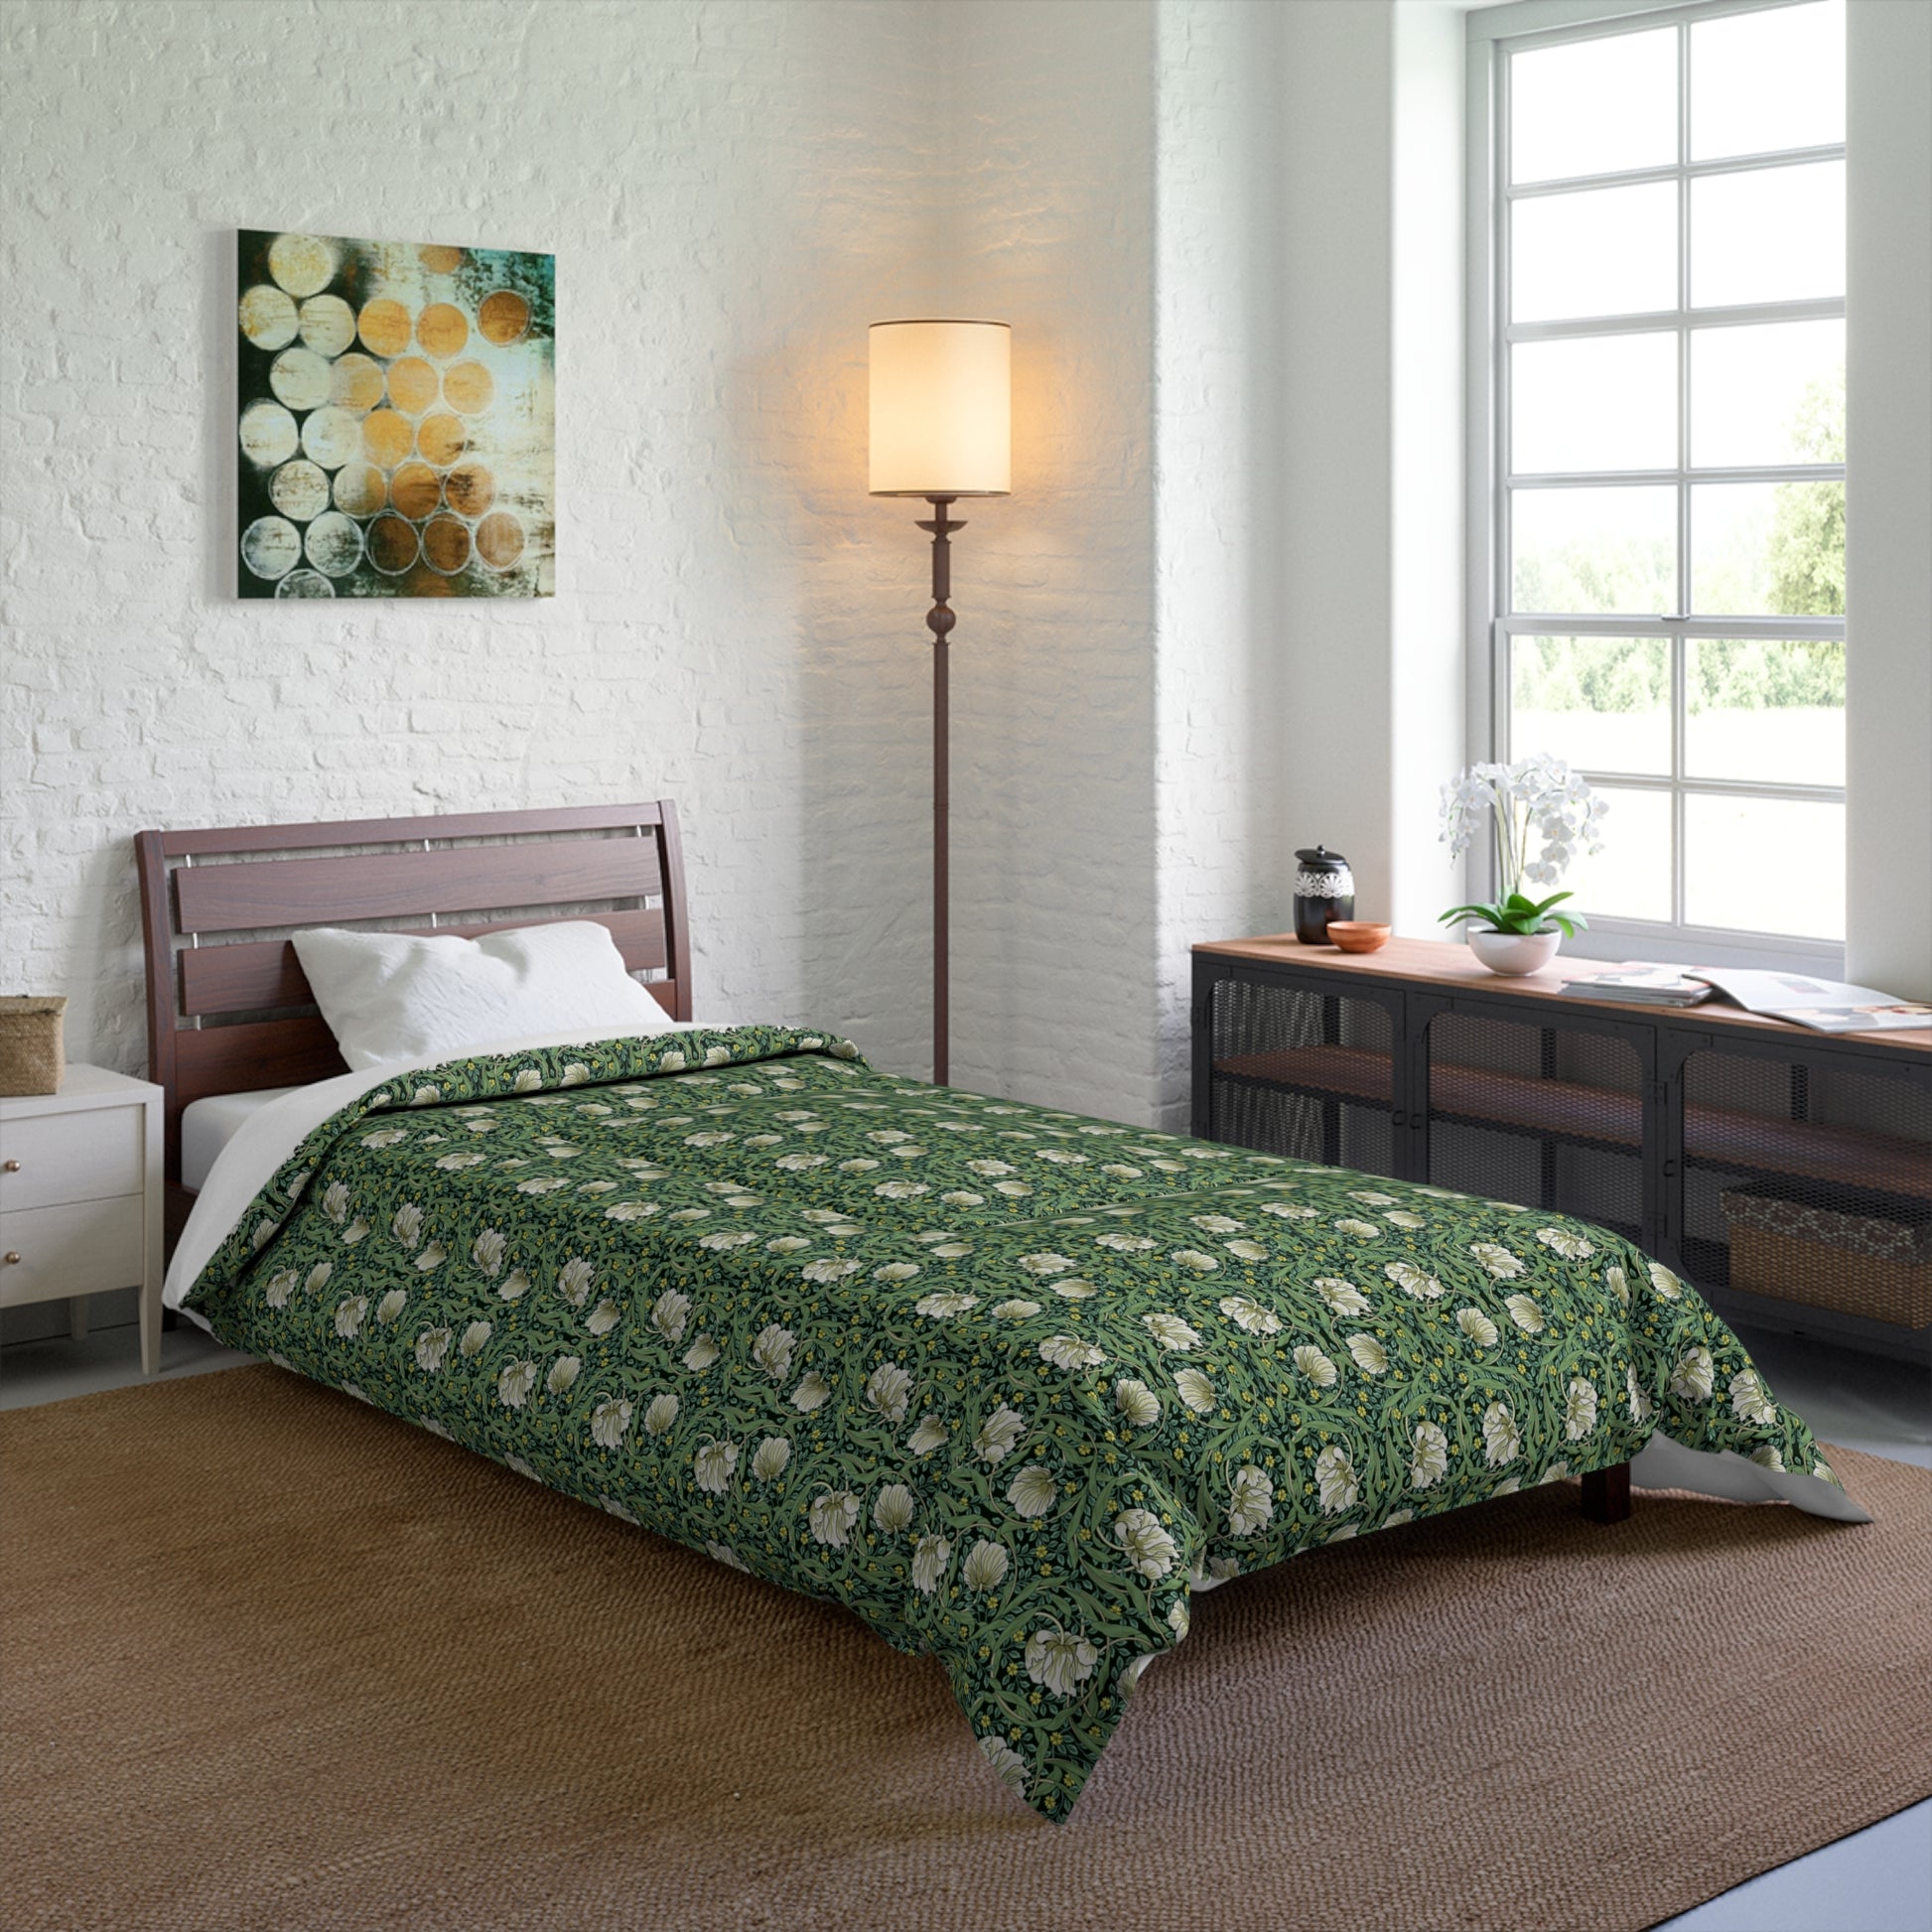 william-morris-co-comforter-pimpernel-collection-green-4